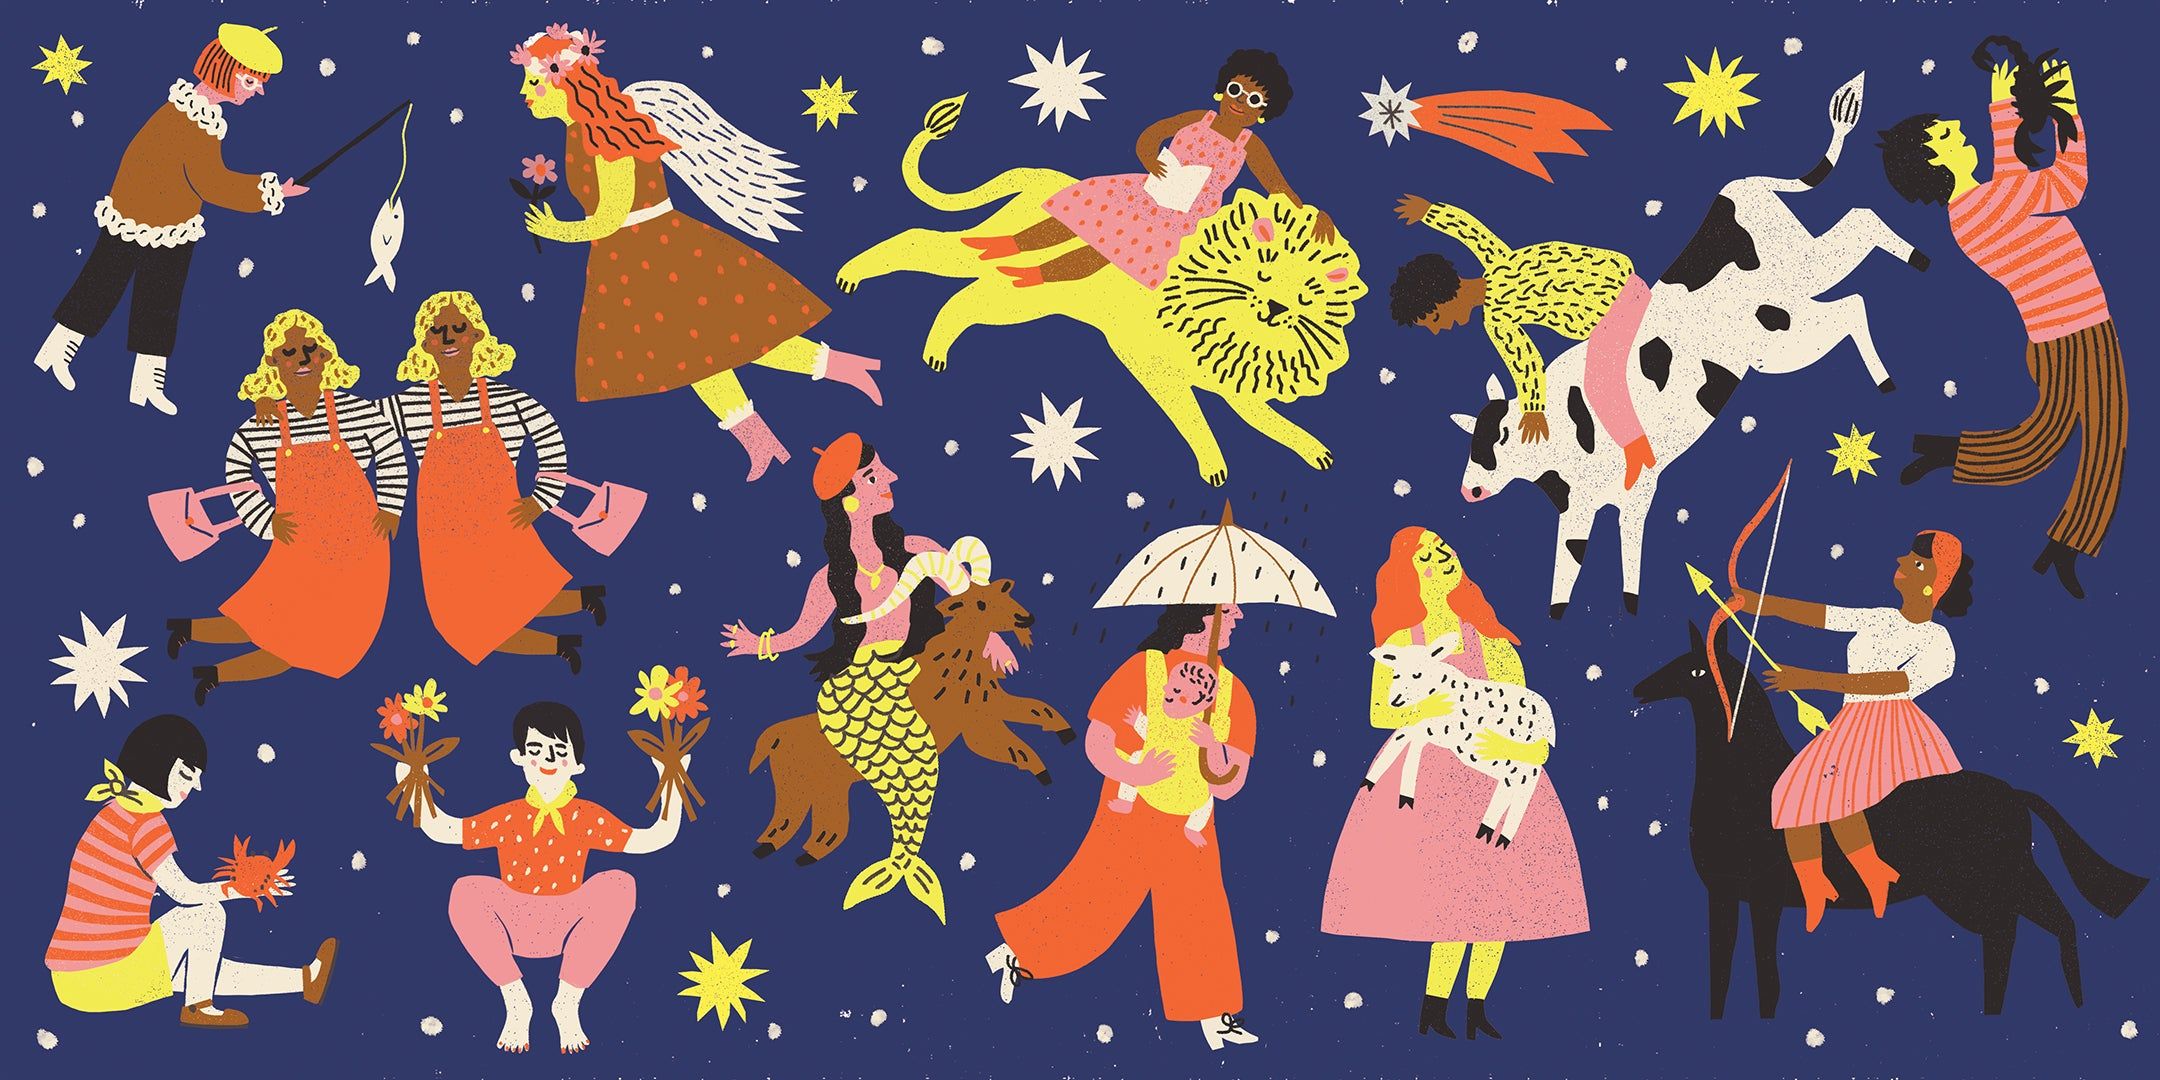 parenting horoscope illustration with people as each zodiac